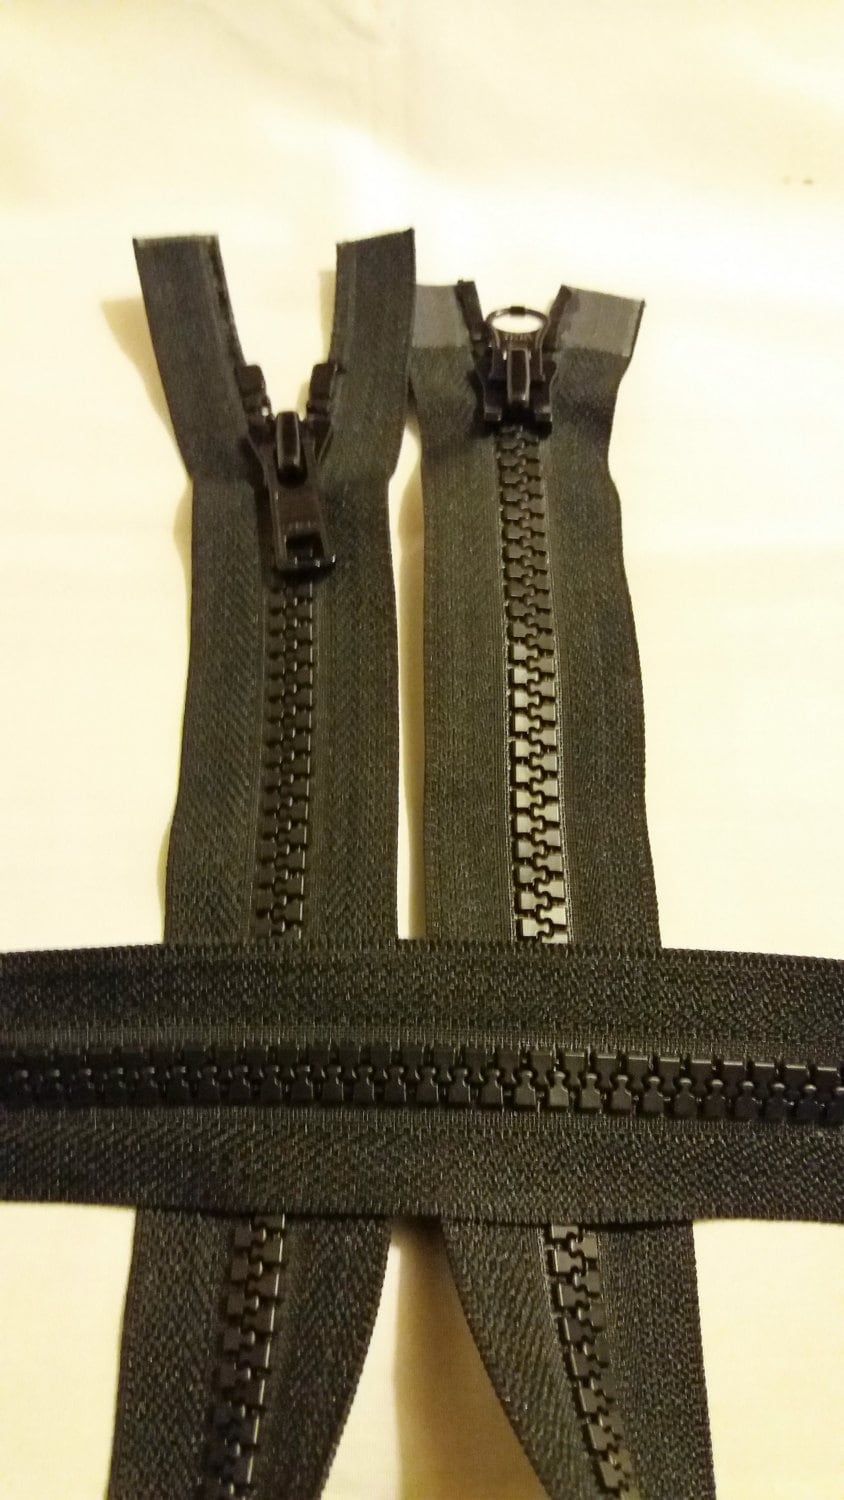 127cm LONG Ideal for kit bags no 5. CHUNKY ZIPS Zippers Sewing Black YKK 